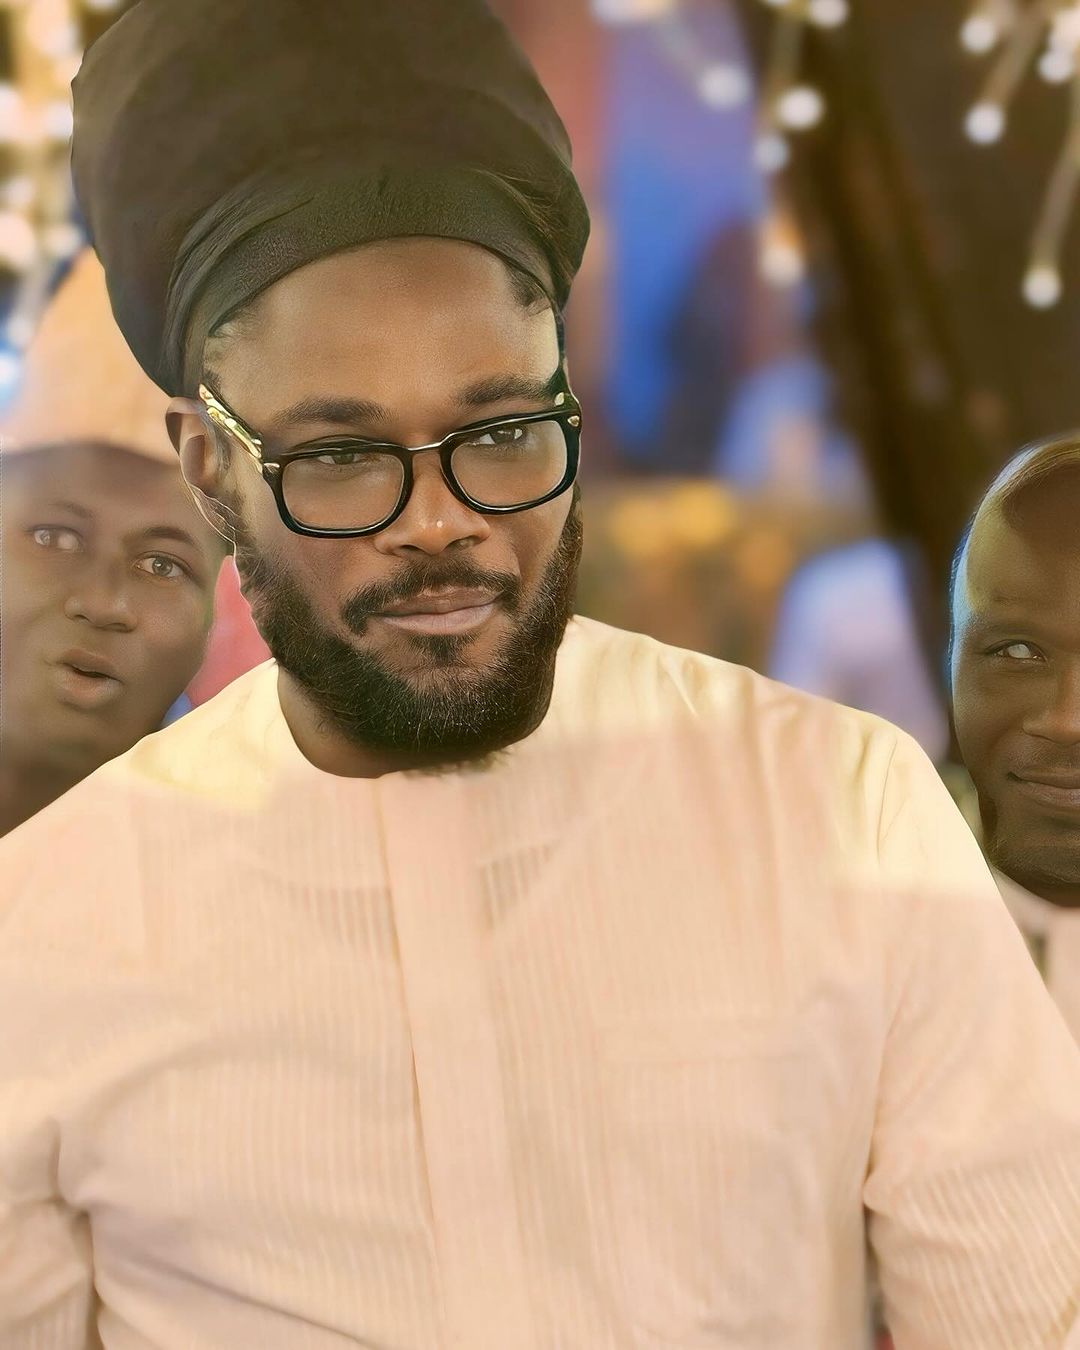 Nigerian Artiste Daddy Showkey Was Almost Burnt Alive For Stealing [Video]